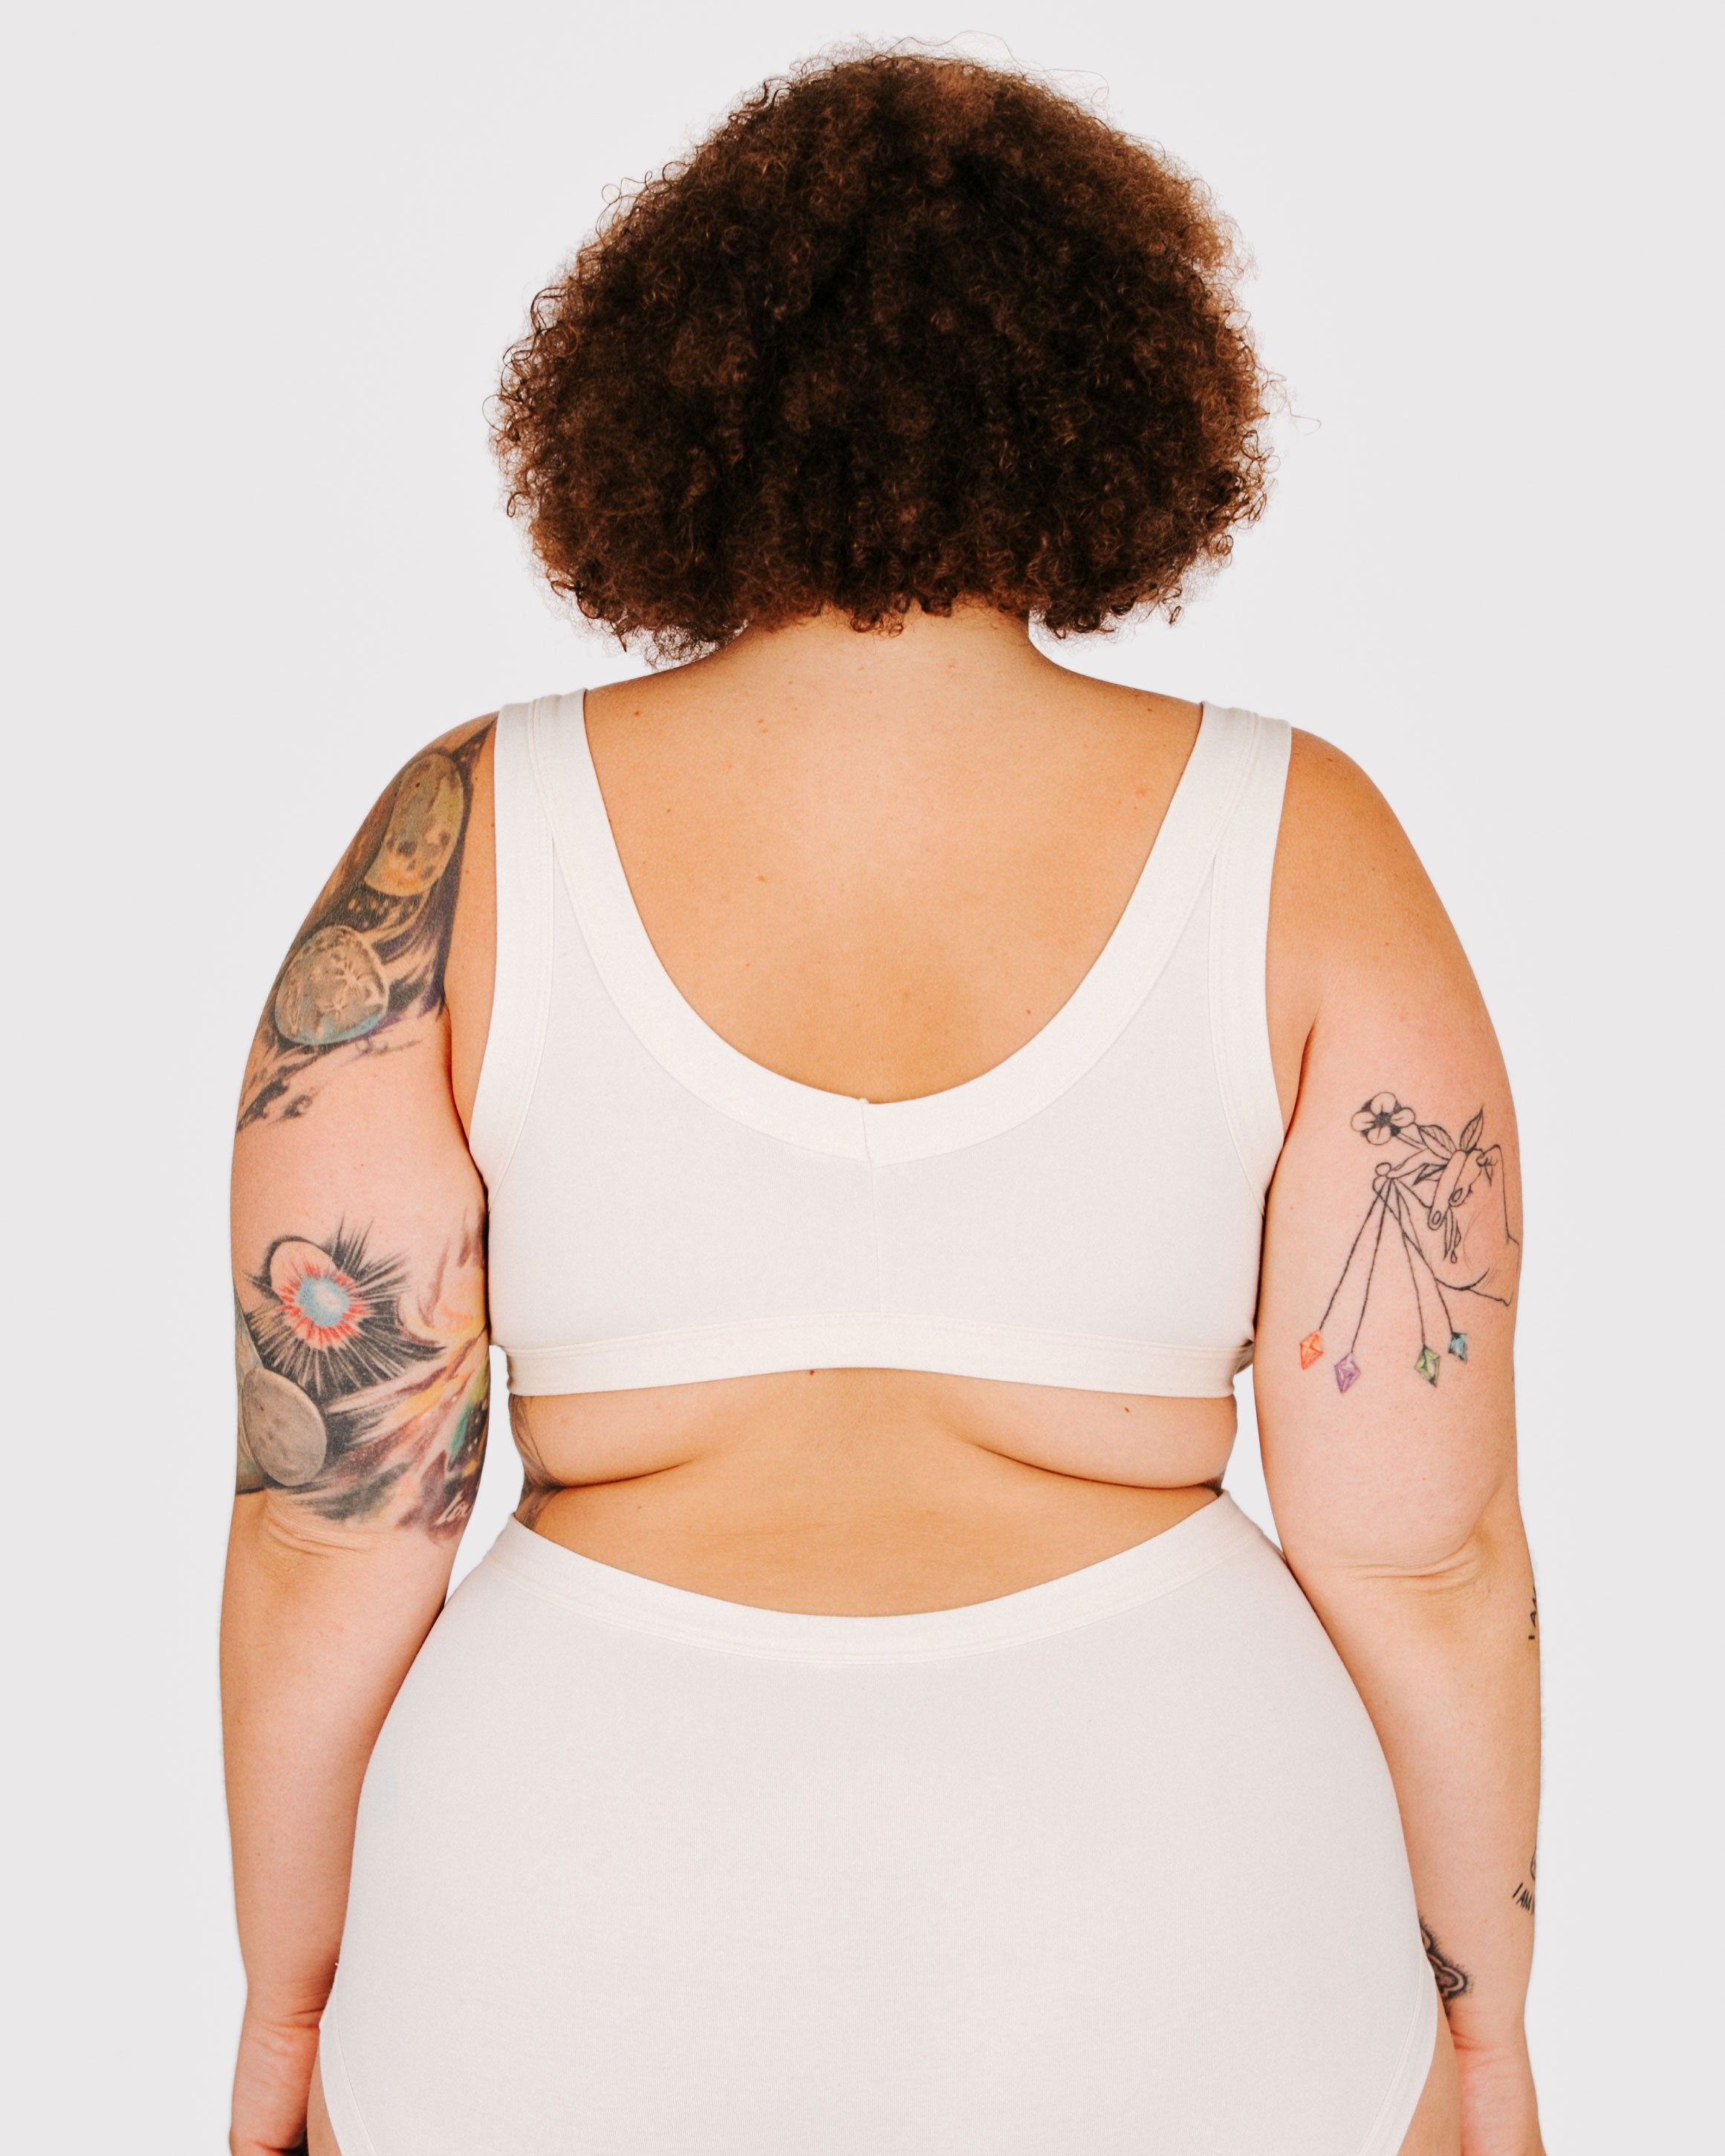 Fit photo from the back of Thunderpants organic cotton Bralette and Original Style underwear in off-white on a model.